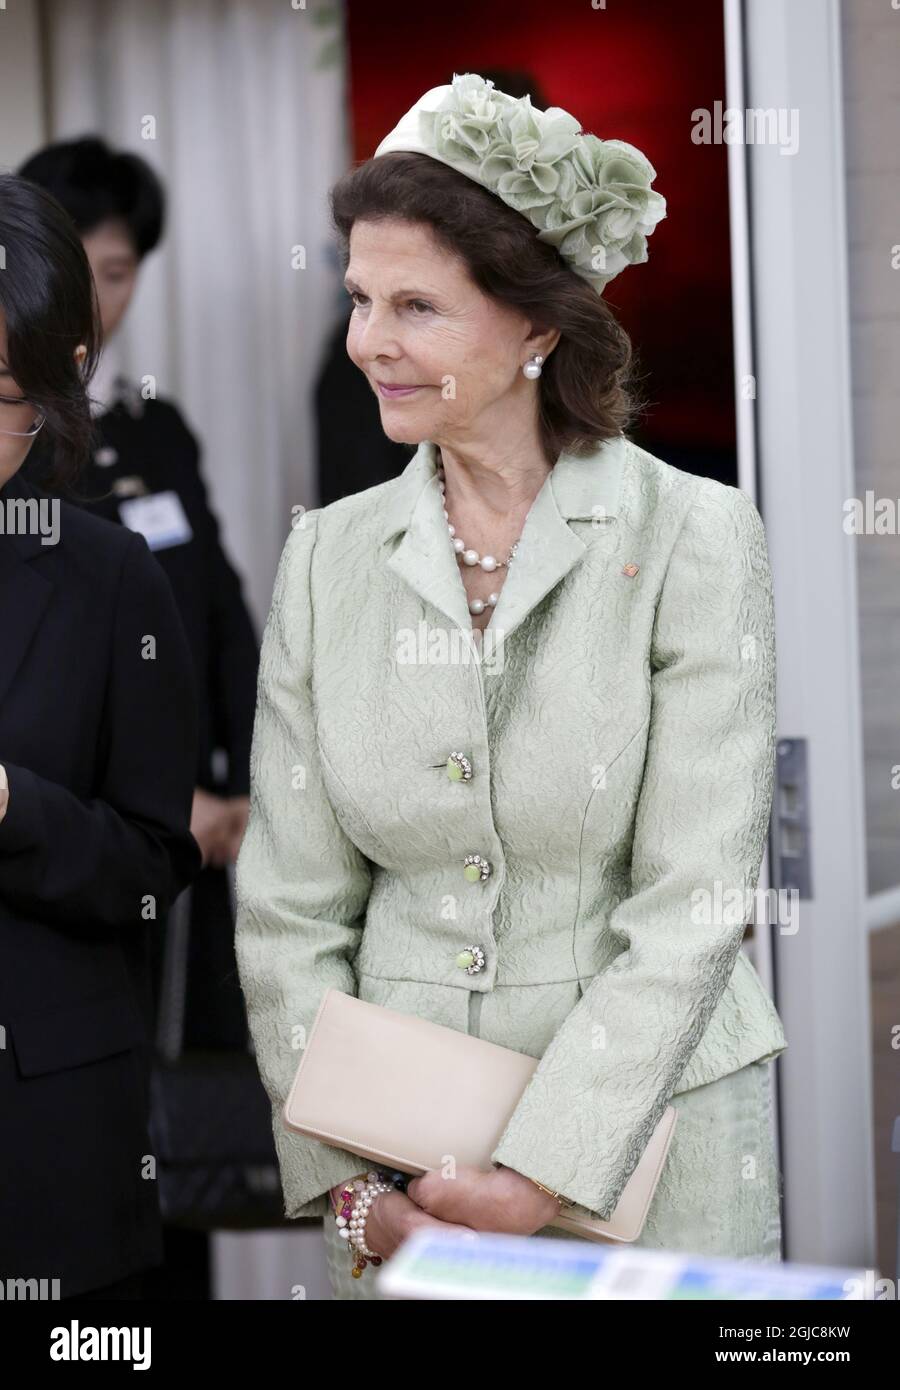 Queen Silvia State visit to Sweden by the President of the Republic of  Korea. Visit to Stiftelsen Silviahemmet, education center for the care of  people with dementia, Stockholm, Sweden 2019-06-14 (c) Johan